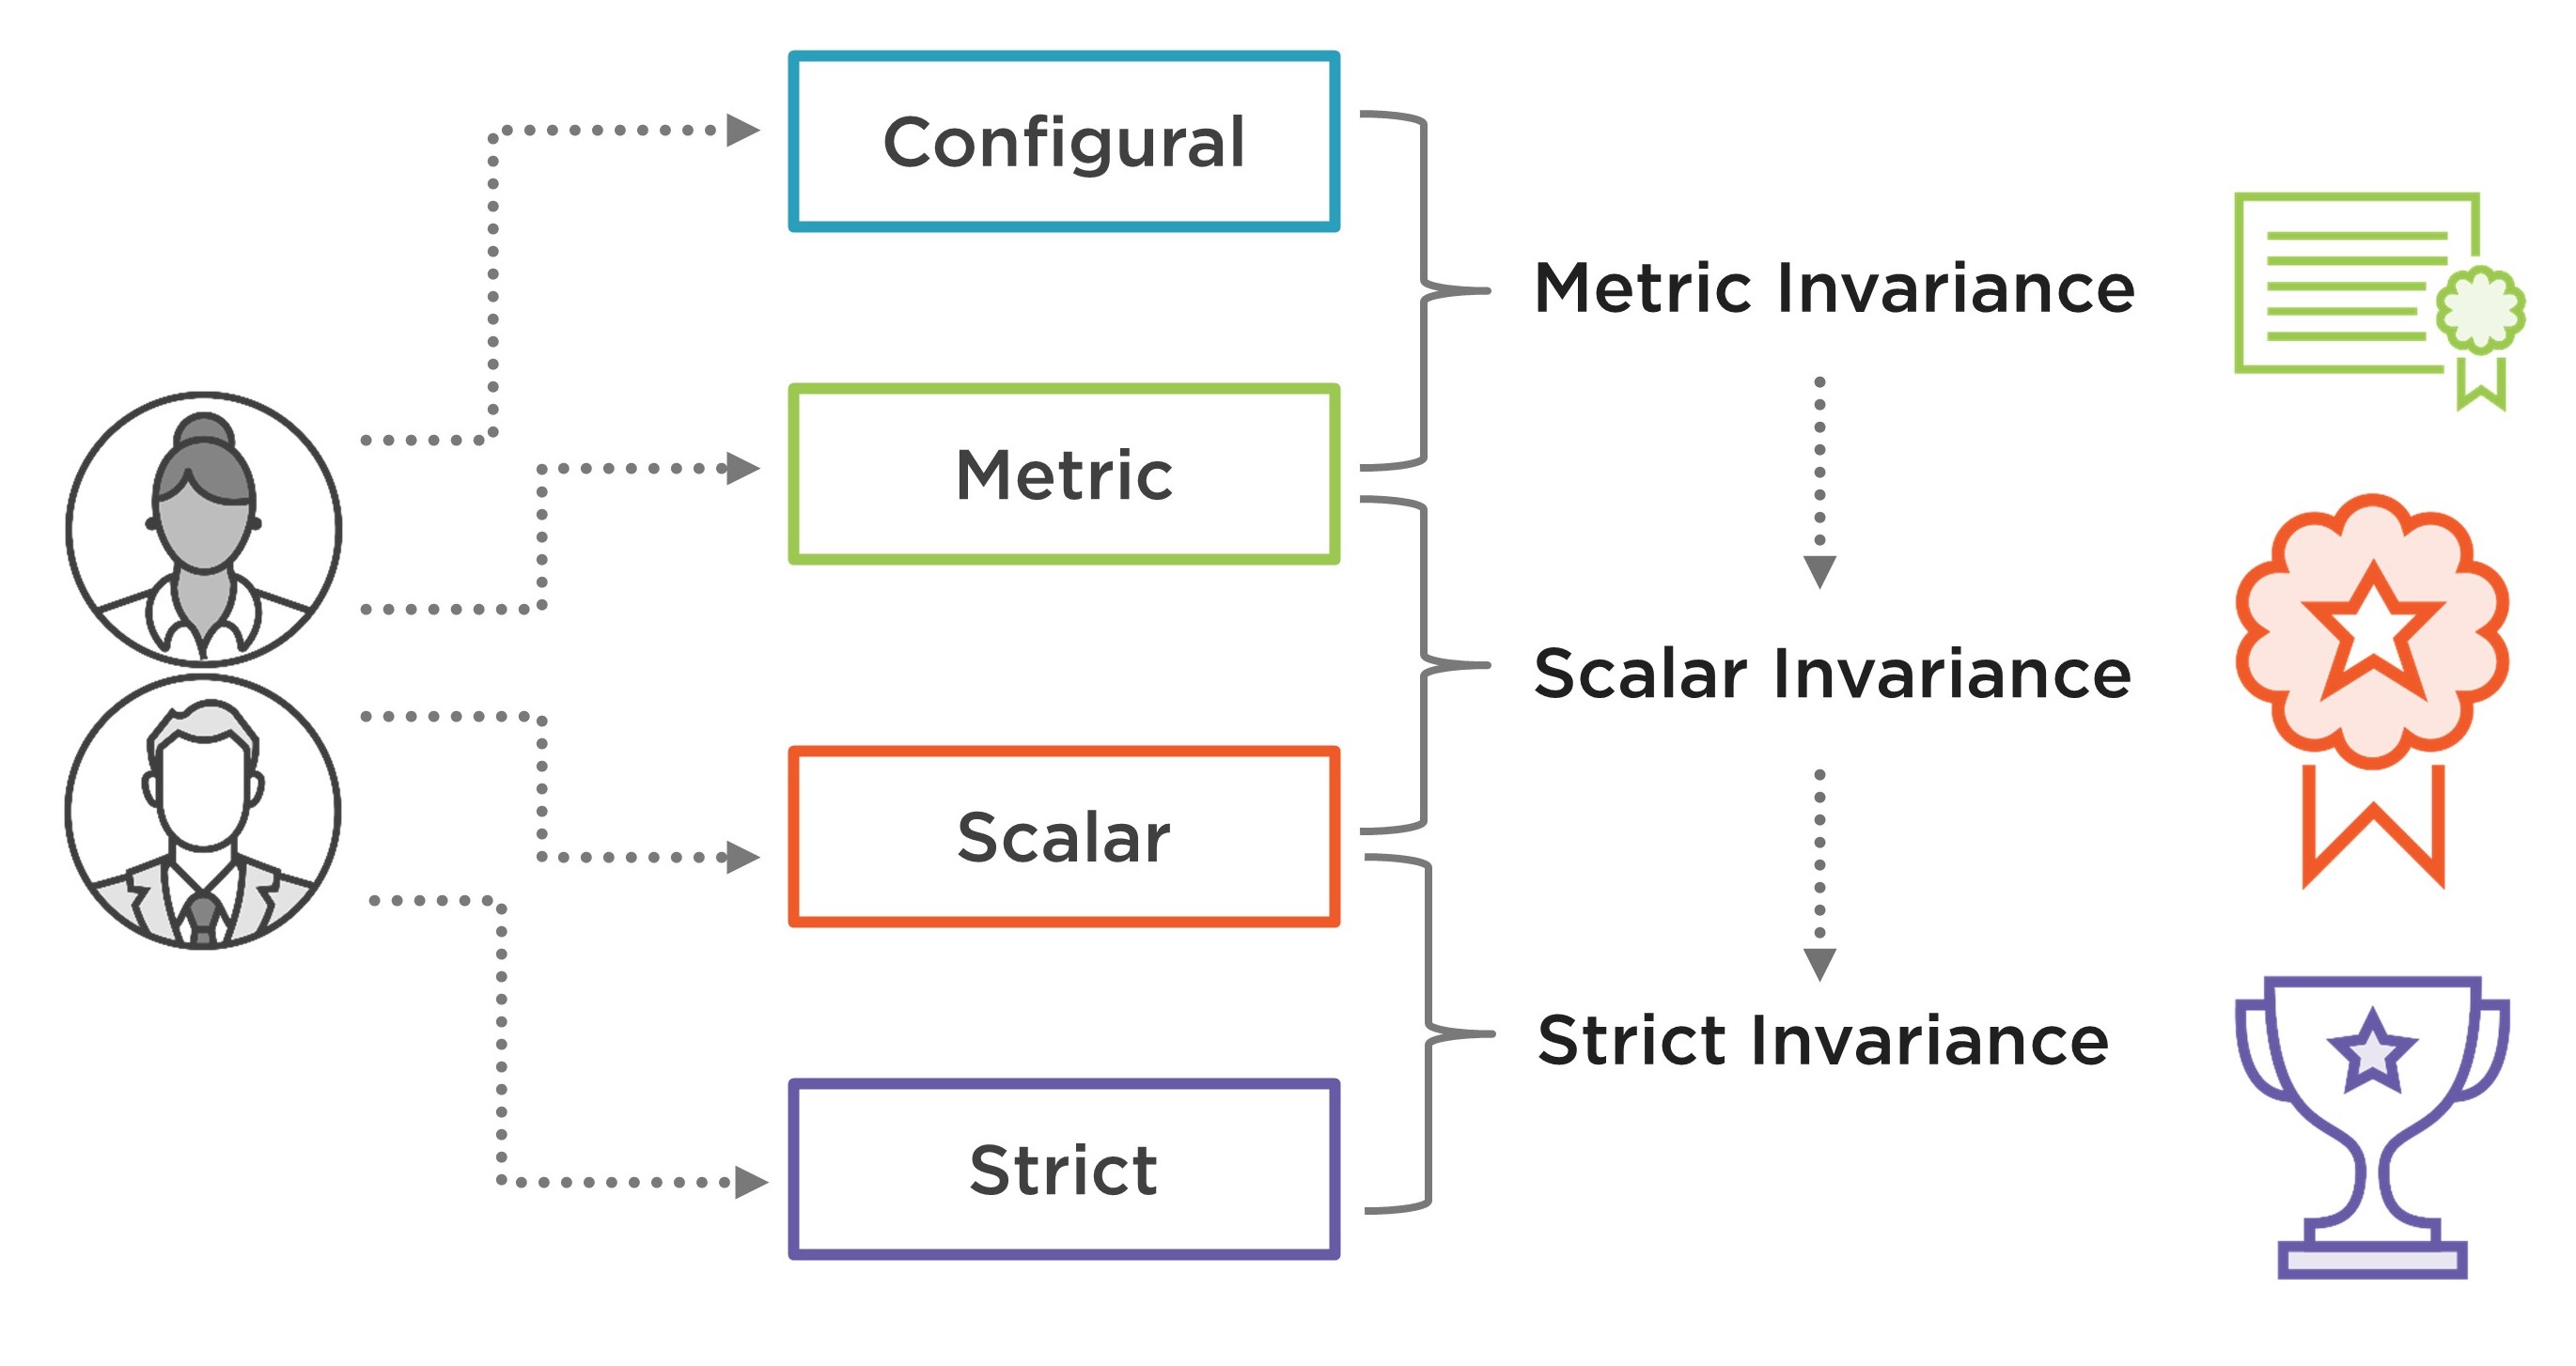 Figure 1: A summary of measurement invariance models